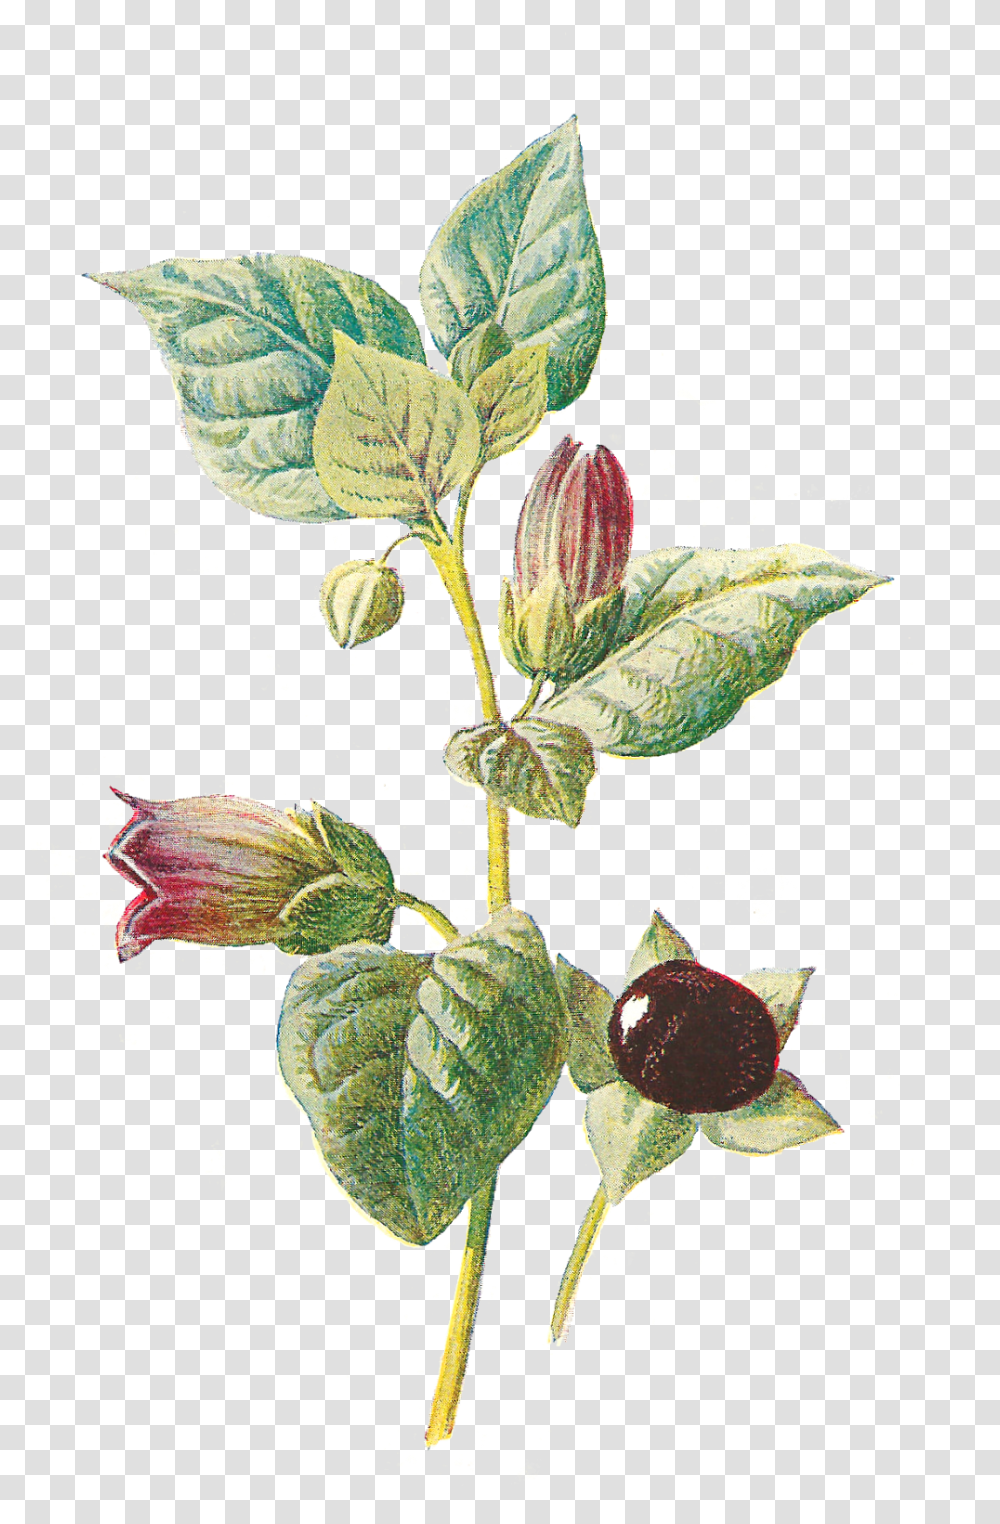 Flower Wildflower Deadly Nightshade Image Illustration Deadly Nightshade Flower Illustration, Plant, Acanthaceae, Fruit, Food Transparent Png